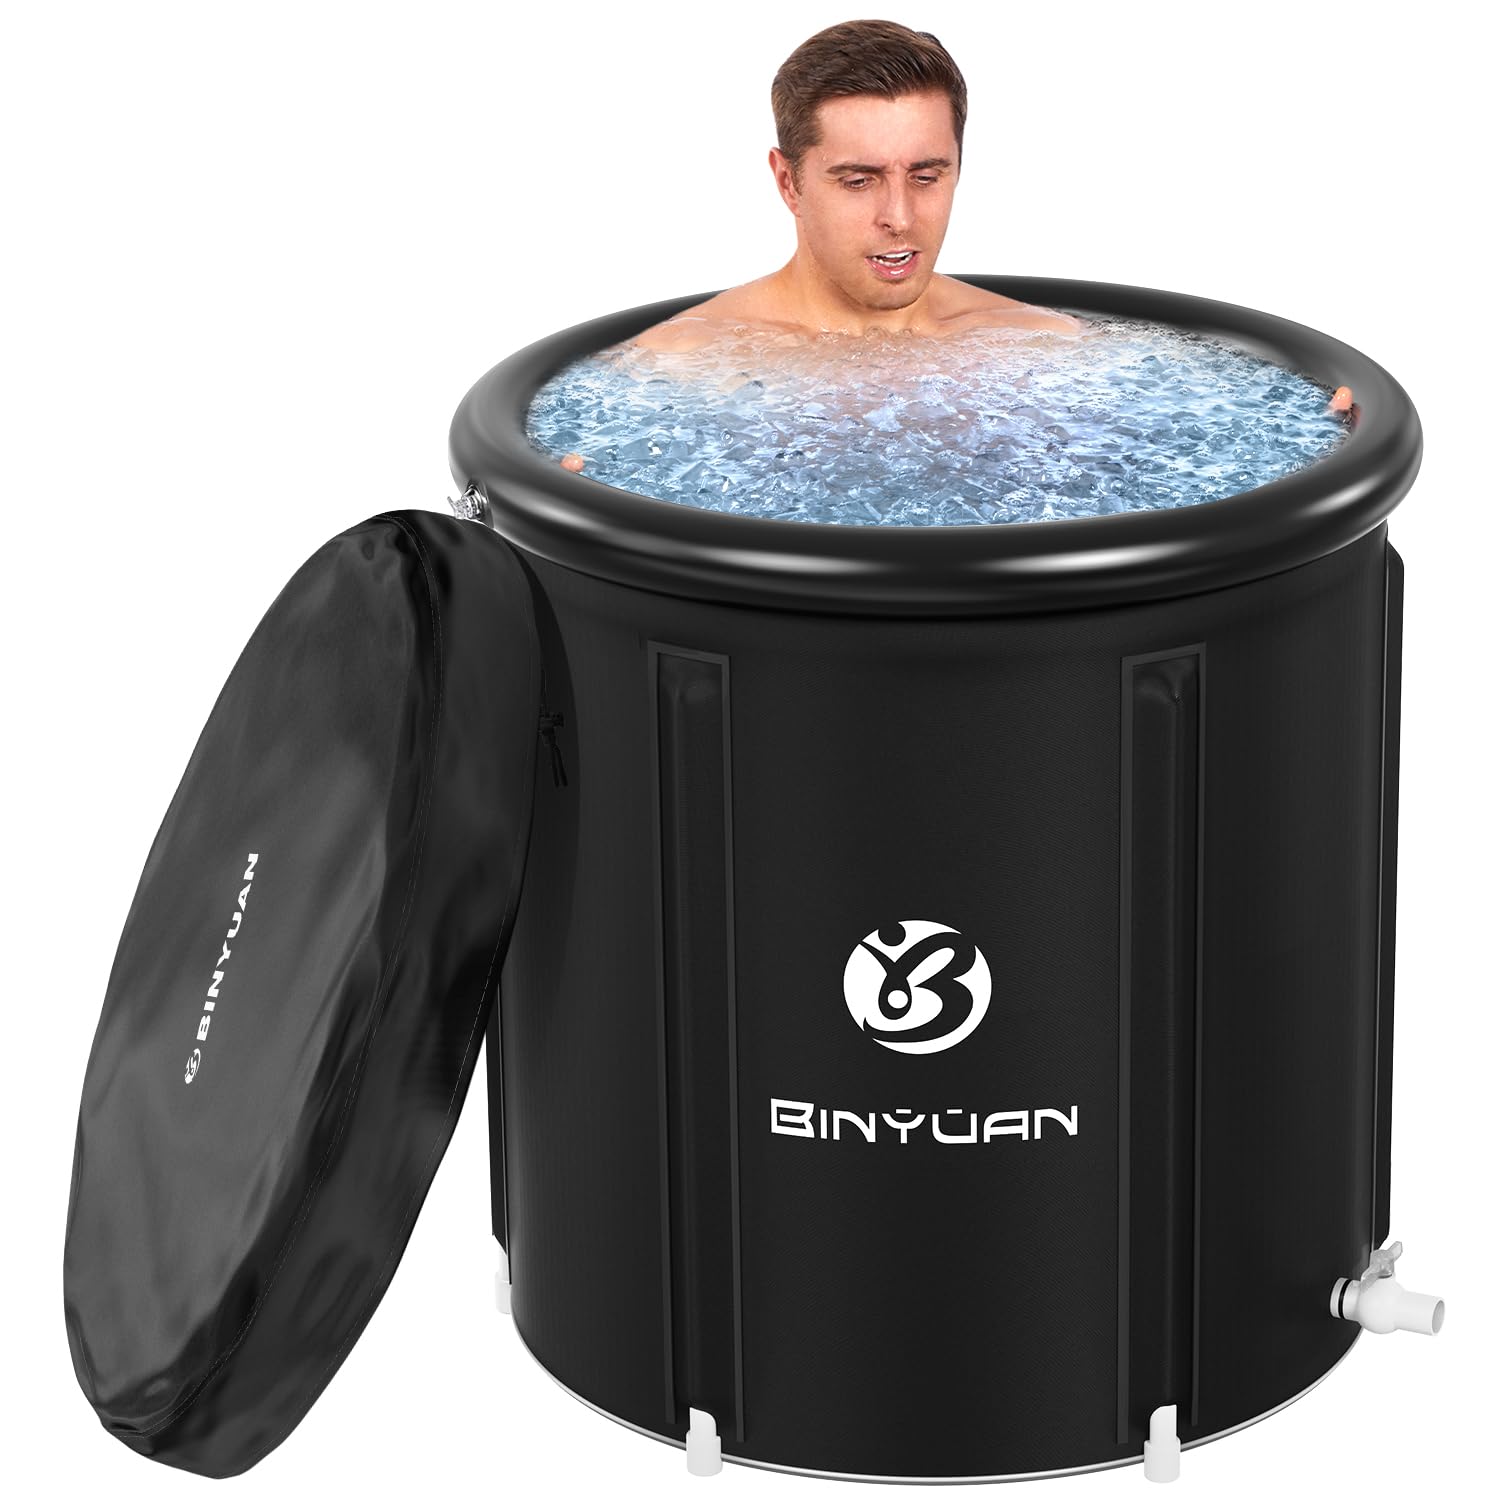 XL Ice Bath Tub for Athletes With Cover 106 Gallons Cold Plunge Tub for Recovery, BINYUAN Portable Ice Bath Plunge Pool Suitable for Family Gardens, Gyms, Arena and Other Cold Water Therapy Training